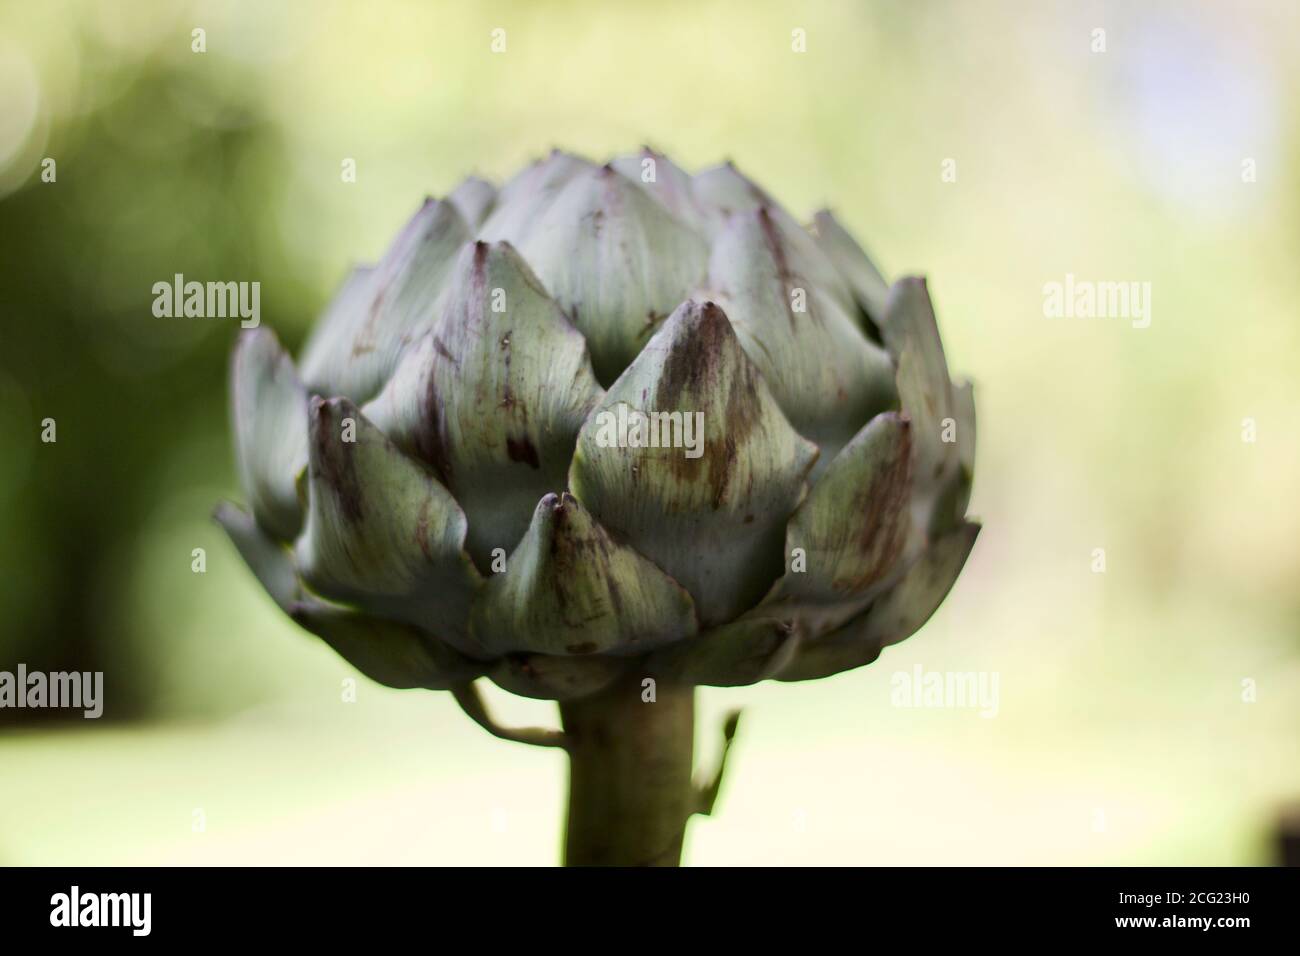 Single globe artichoke against soft pale green background with copy space Stock Photo